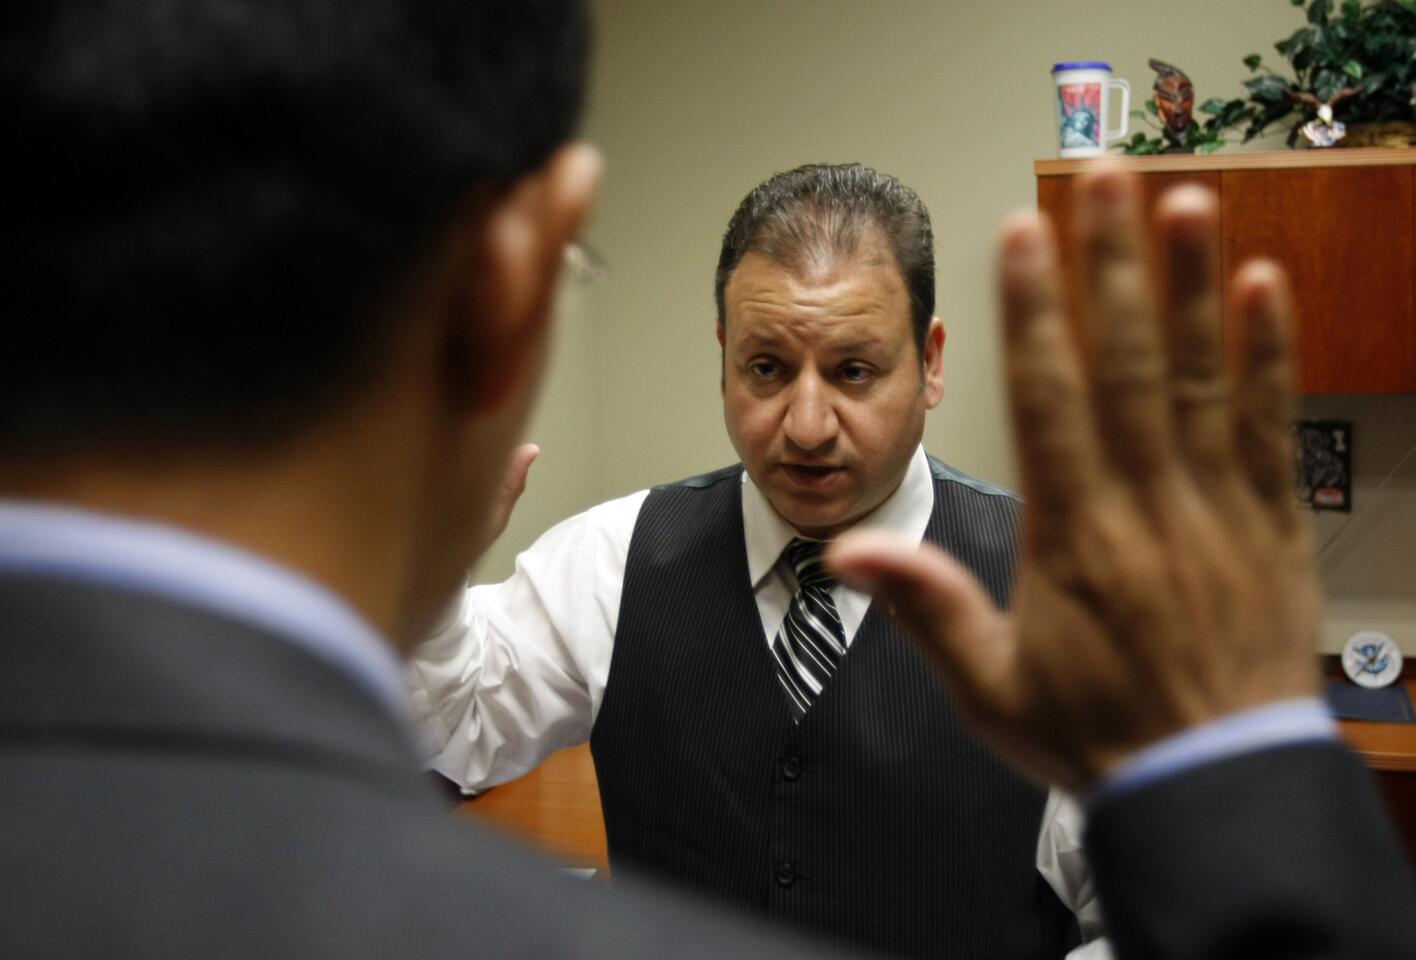 An asylum applicant takes an oath of honesty during an interview with U.S. Citizenship and Immigration Services asylum officer Farhad Zamani in Anaheim.